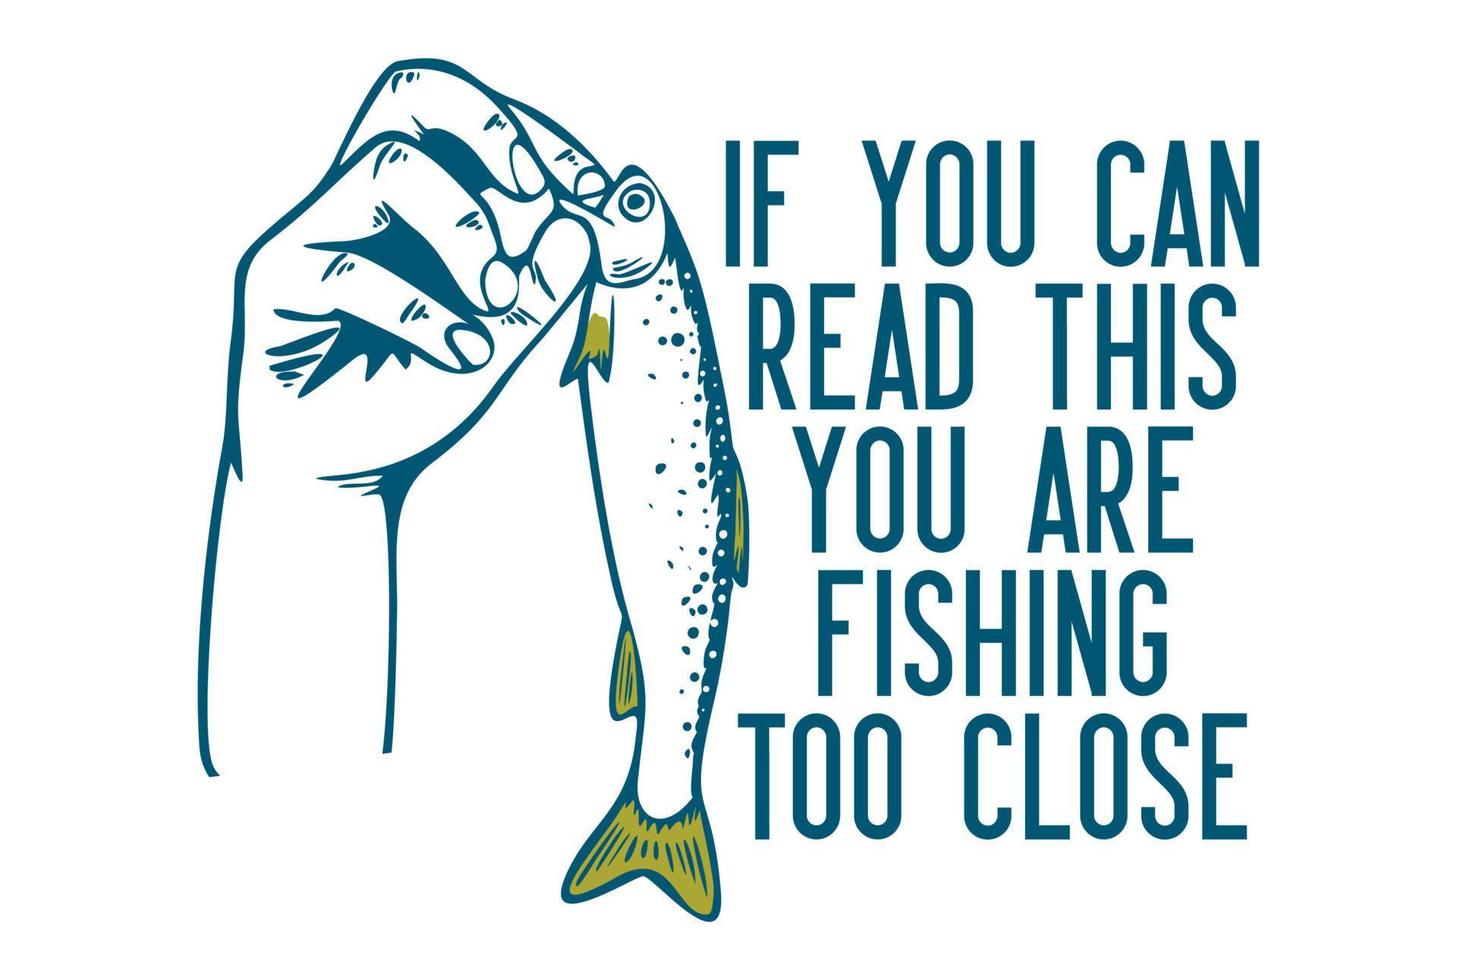 t shirt design if you can read this you are fishing too close with hand grabbing small fish vintage illustration vector